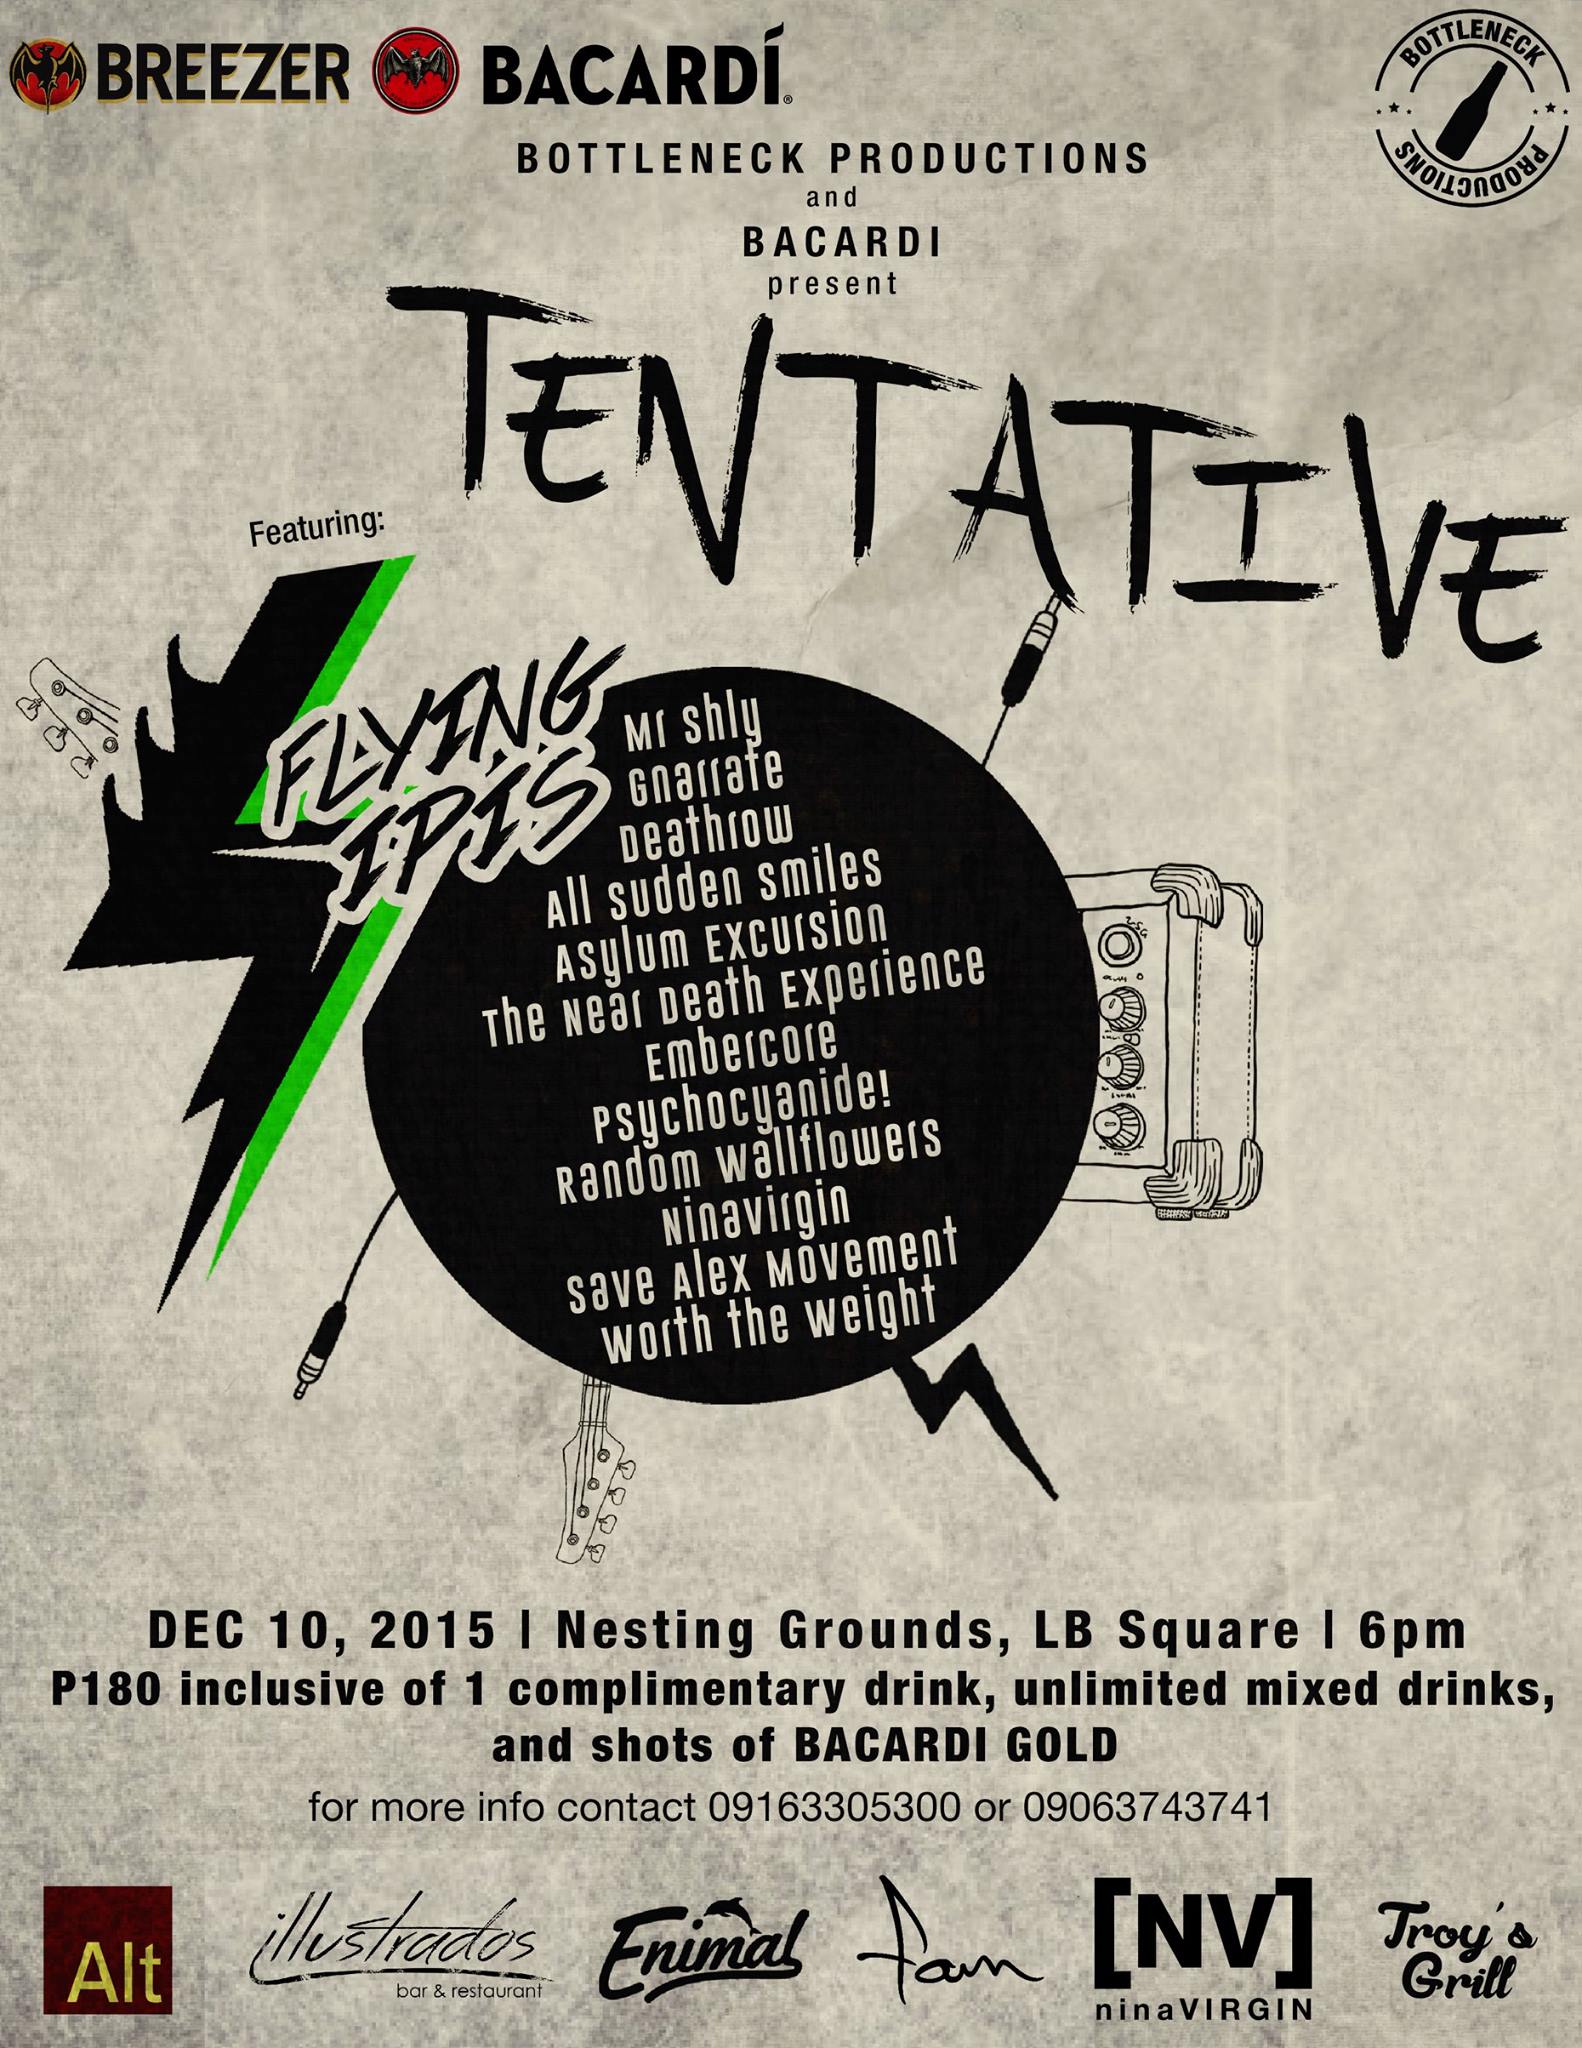 TENTATIVE clock Thursday, December 10 at 6 PM Starts in about 1 hour · 86°F Partly Cloudy pin Show Map Nesting Ground garden cafe LB Square, Grove, 4030 Los Baños, Laguna, Philippines BANDS. BOOZE. PARTY. Listen to the music of FLYING IPIS and homegrown bands such as Embercore, Nina Virgin, Random Wallflowers, Deathrow, The Near Death Experience, Gnarrate, All Sudden Smiles, Asylum Excursion, Save Alex Movement, Psychocianide!, Mr. Shly, and more, as they take the stage this December 10! Tickets are priced at Php180, inclusive of one beer, unlimited mixed drinks, and shots of Bacardi Gold! ANNOUNCEMENT: CHANGE OF VENUE Para mas malapit, we're holding "Tentative" in Nesting Grounds, LB square, instead of Duplex Tavern. Ang Php 180 niyo, inclusive of one complimentary drink, shots of Bacardi Gold, and UNLI mixed drinks! Kita kits ngayong Thursday, 6pm! FEATURING Flying Ipis Gnarrate Deathrow All Sudden Smiles Asylum Excursion The Near Death Experience Embercore Psychocyanide! Random Wallflowers ninaVIRGIN Save ALEX Movement Worth the Weight